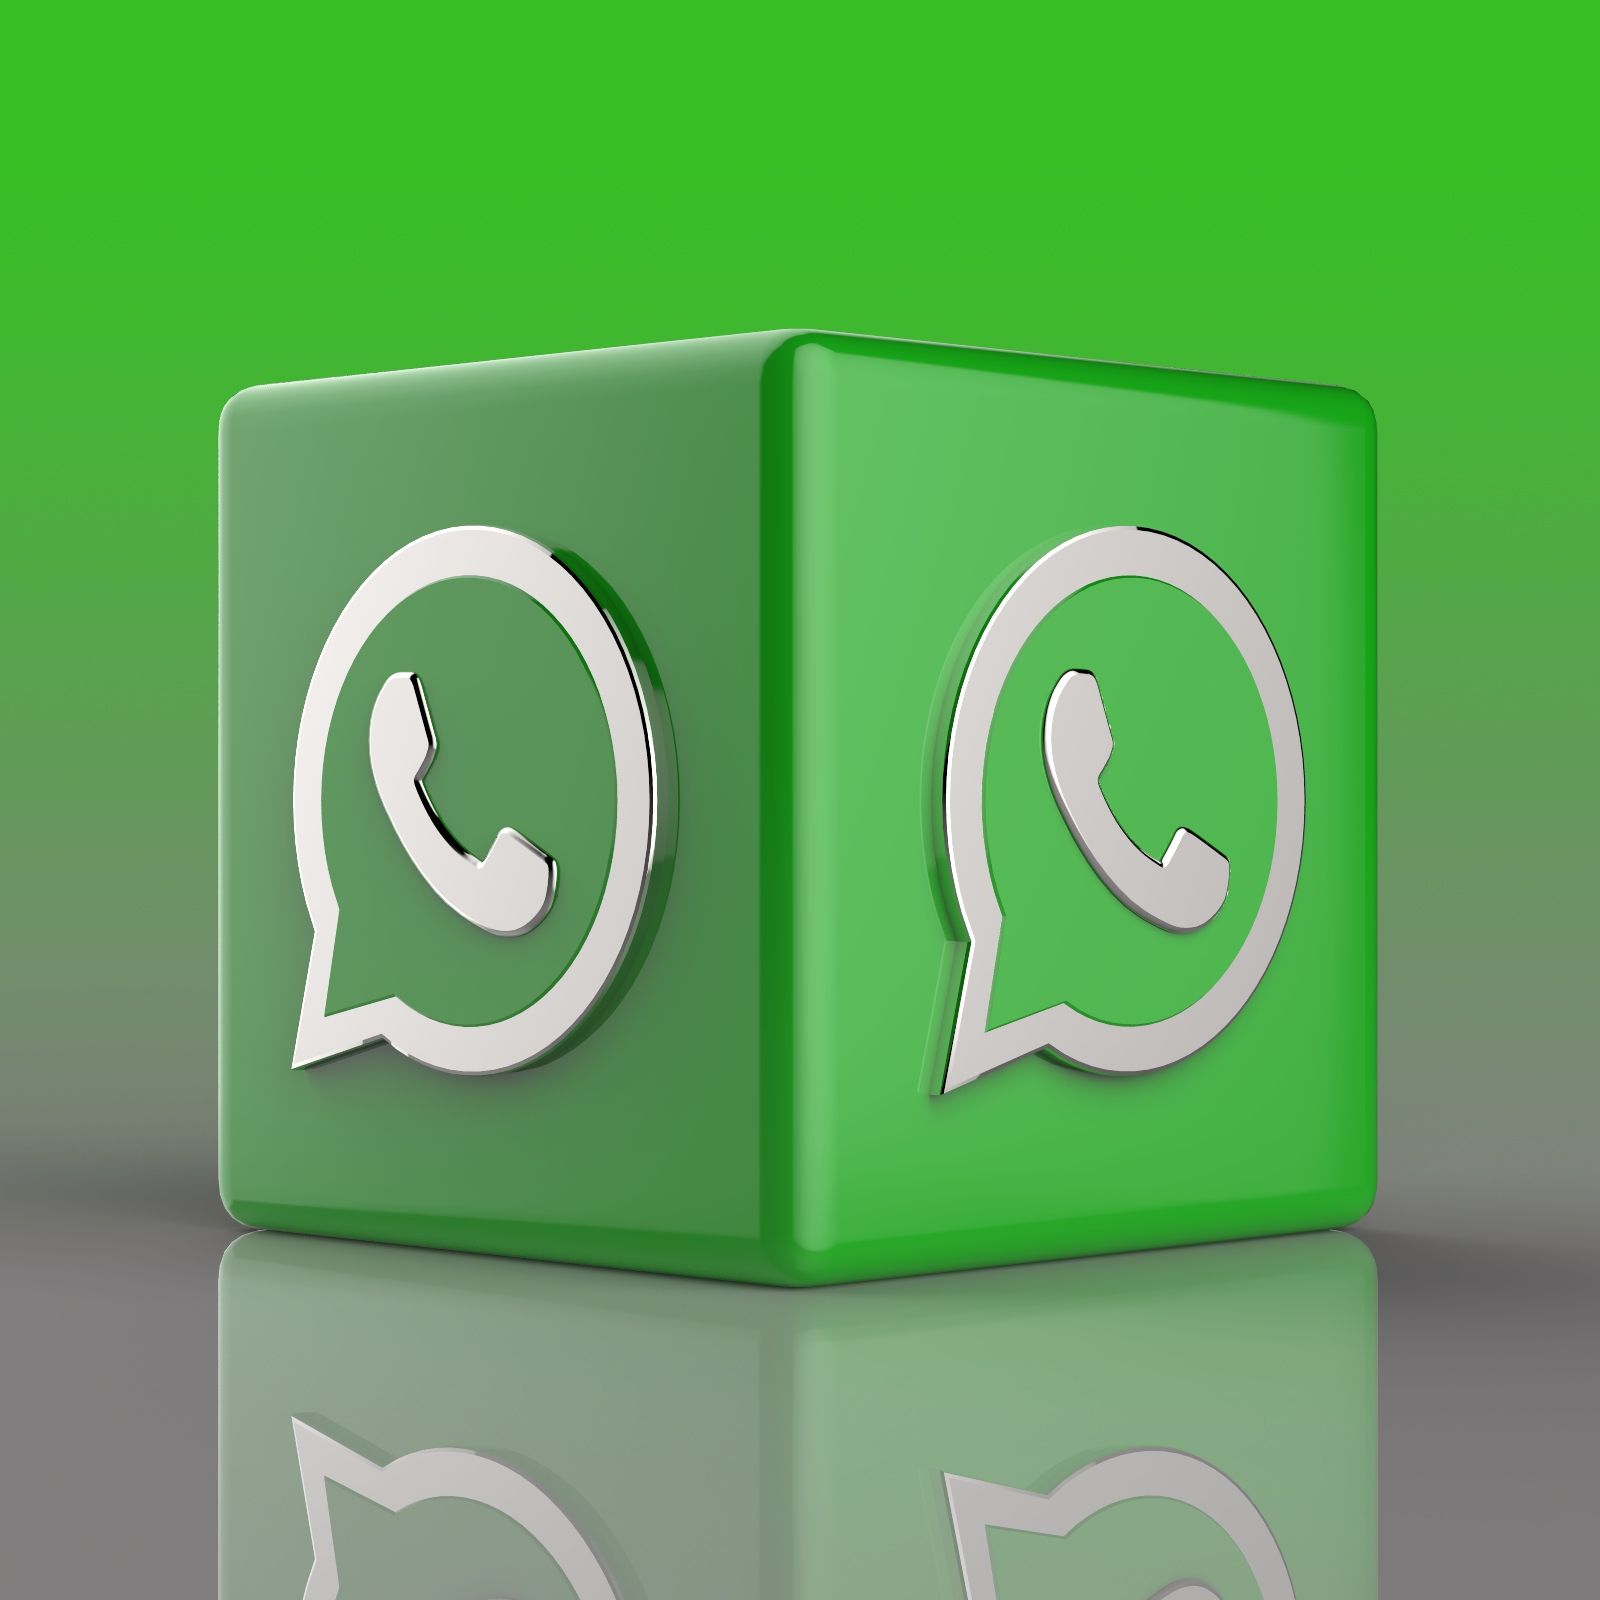 Whatsapp Icon Wallpapers Wallpaper Cave